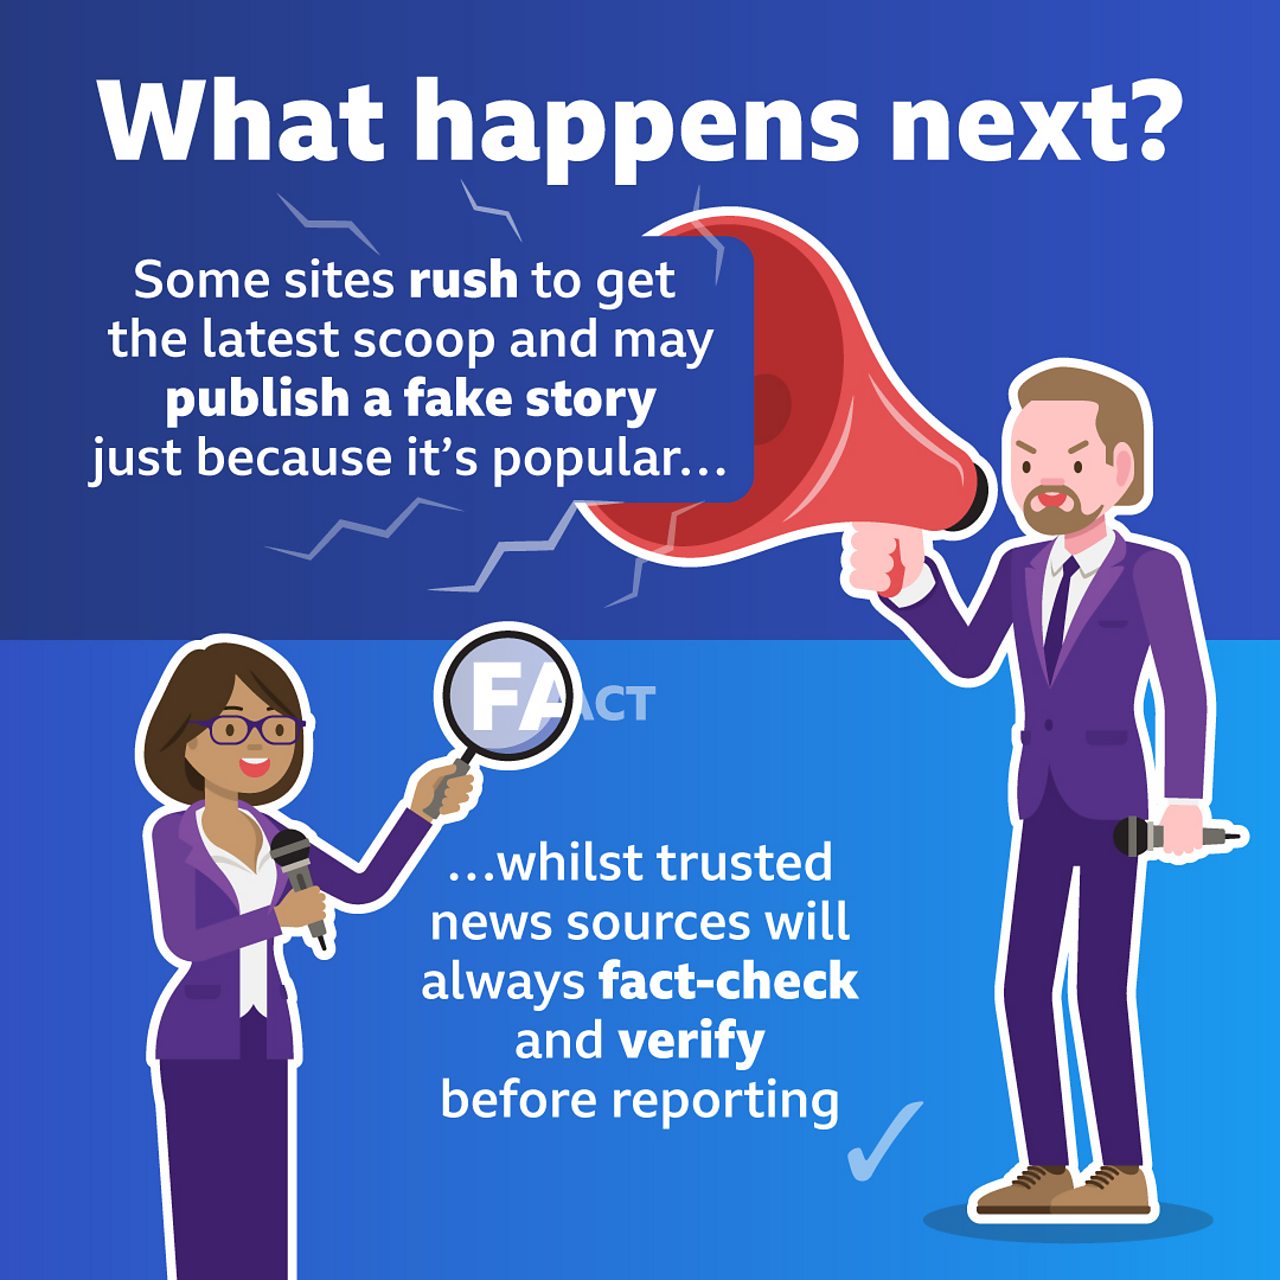 An illustration with the title “What happens next?”. An angry-looking man holds a megaphone with text coming out of it, reading “Some sites rush to get the latest scoop and may publish a fake story just because it’s popular…”. Below, a woman holds up a magnifying glass to the word “FACT”. Next to her, text reads “…whilst trusted news sources will always fact-check and verify before reporting”.